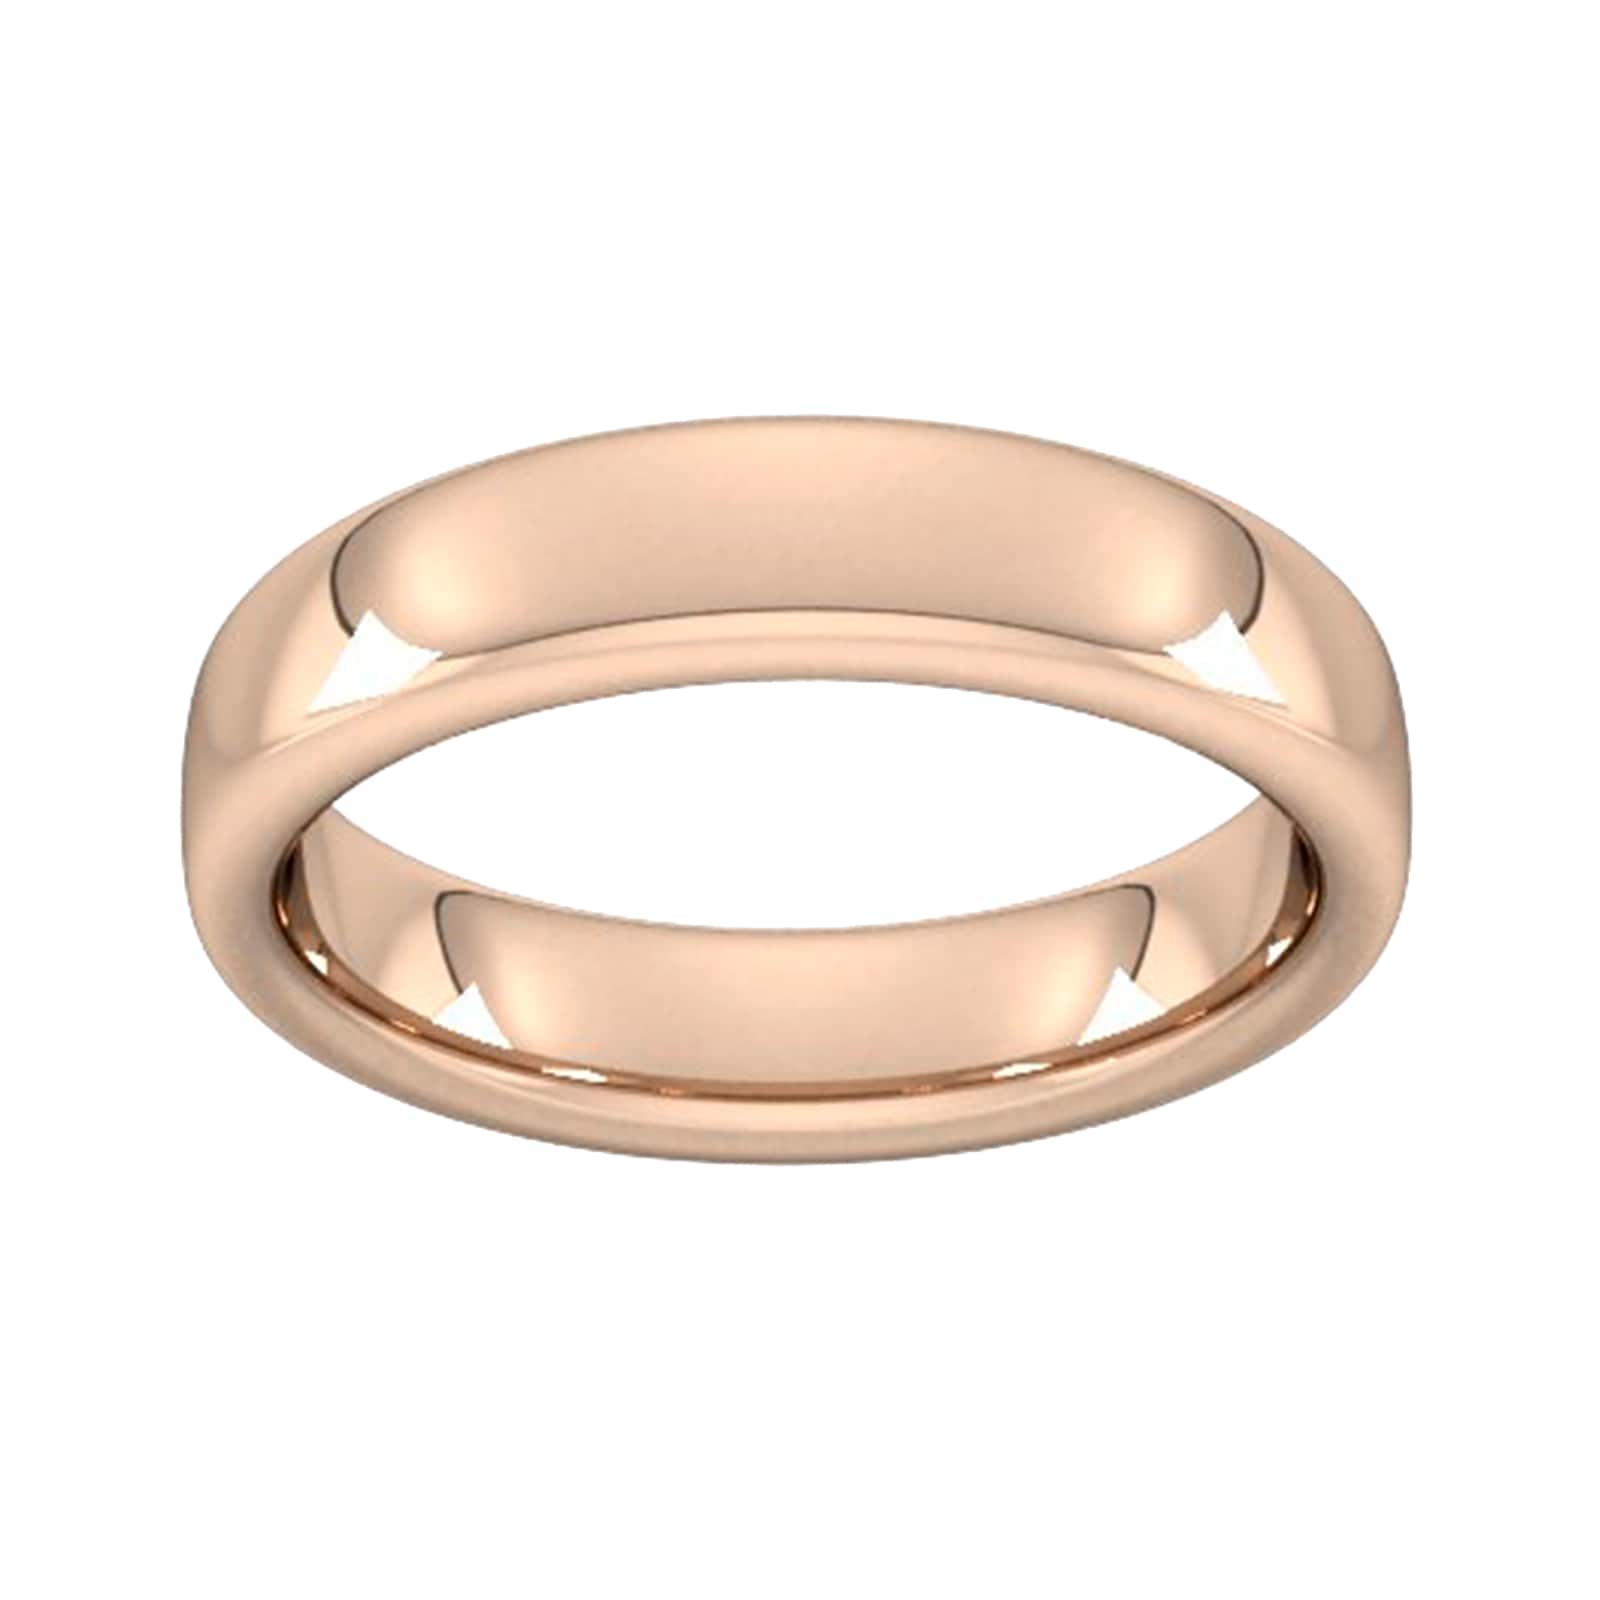 5mm Slight Court Extra Heavy Wedding Ring In 18 Carat Rose Gold - Ring Size N